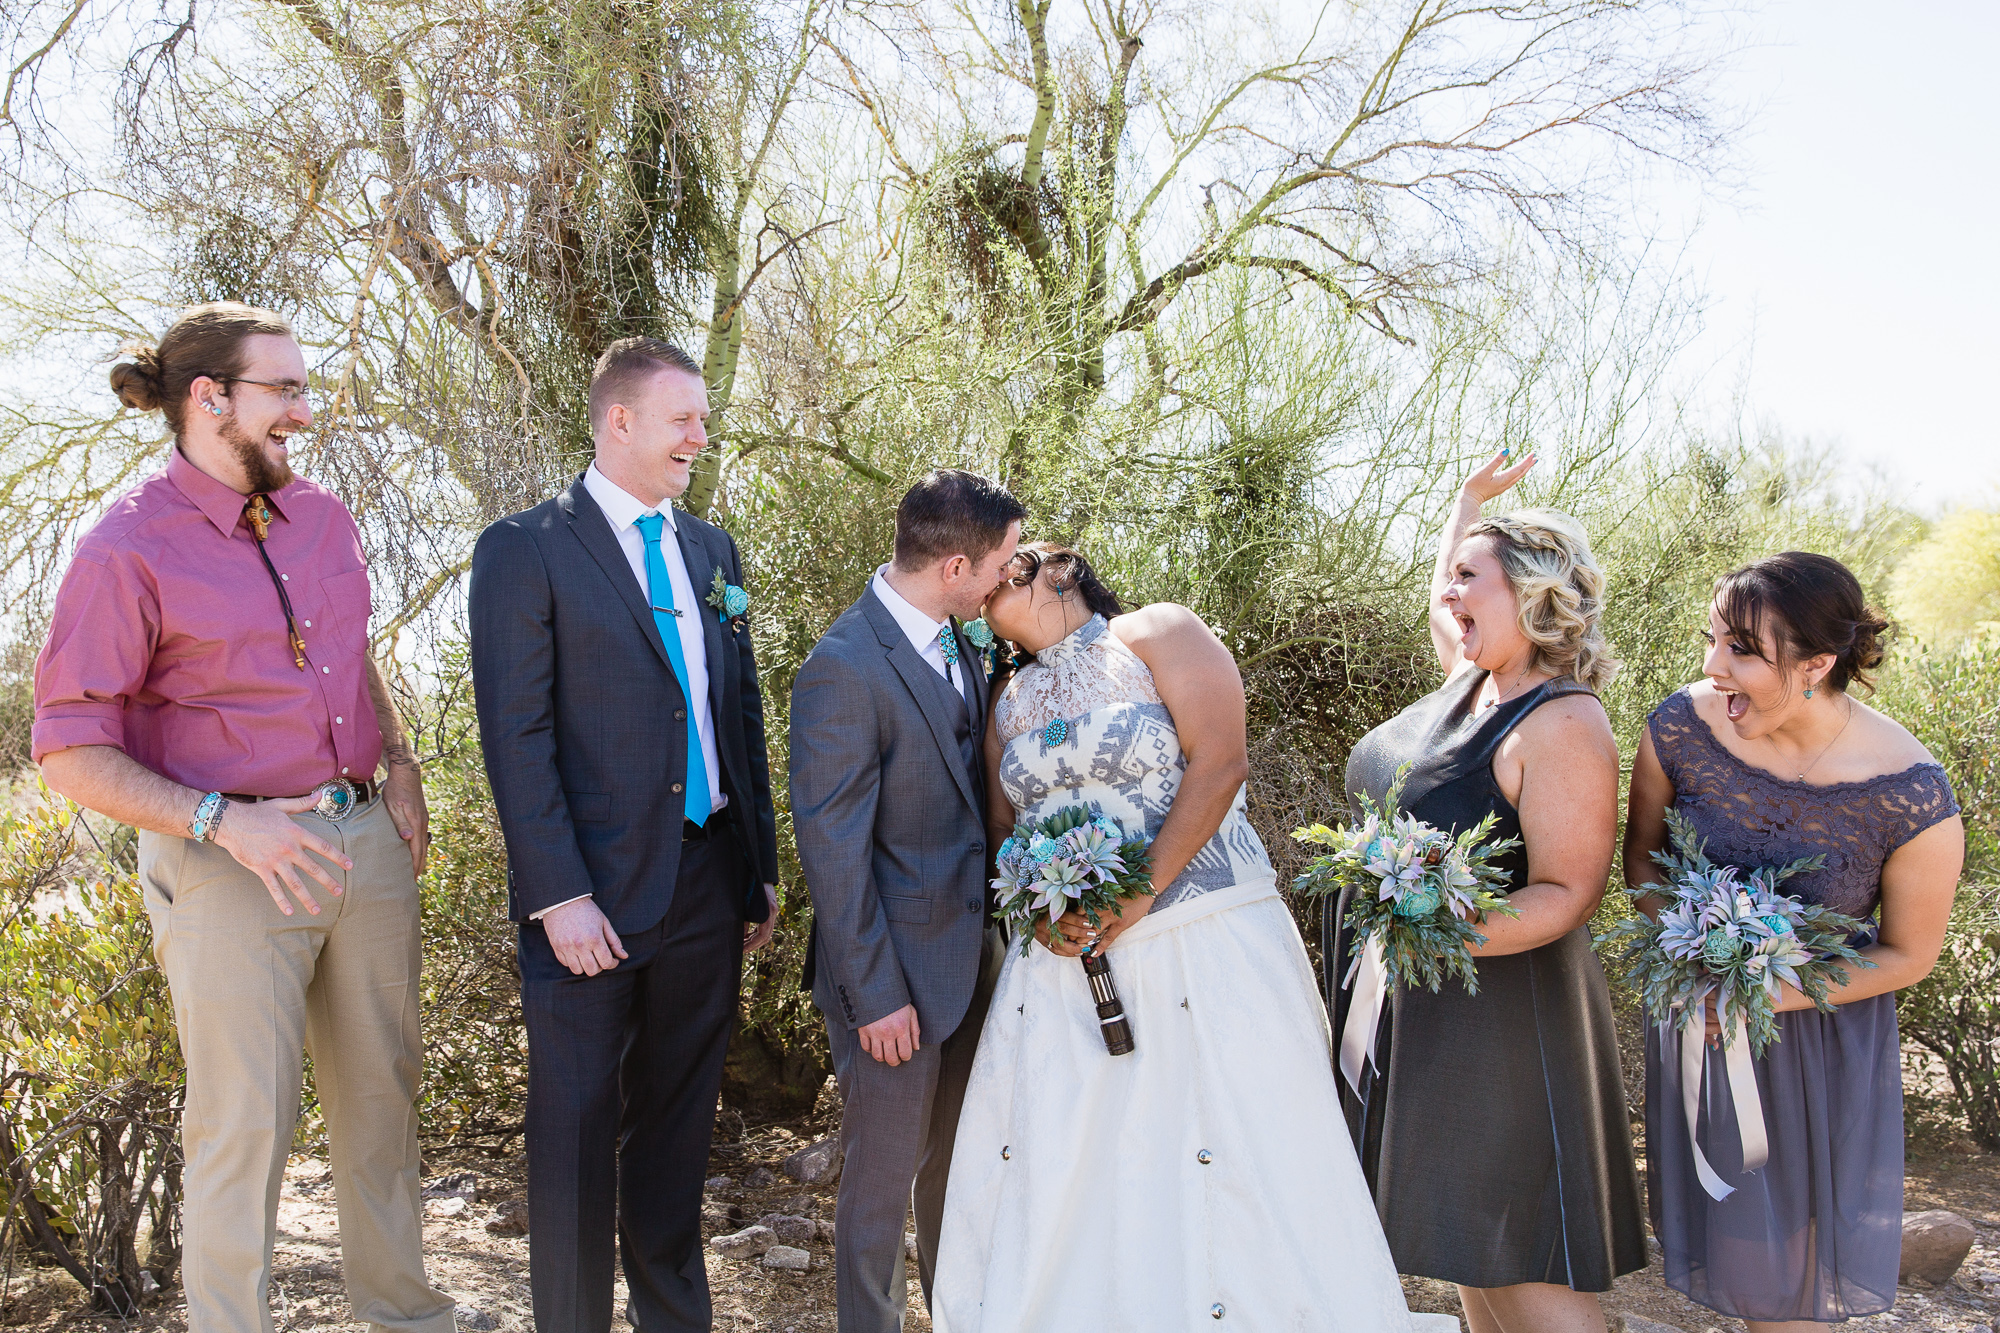 Bridal party getting excited while bride and groom kiss by Arizona wedding photographers PMA Photography.